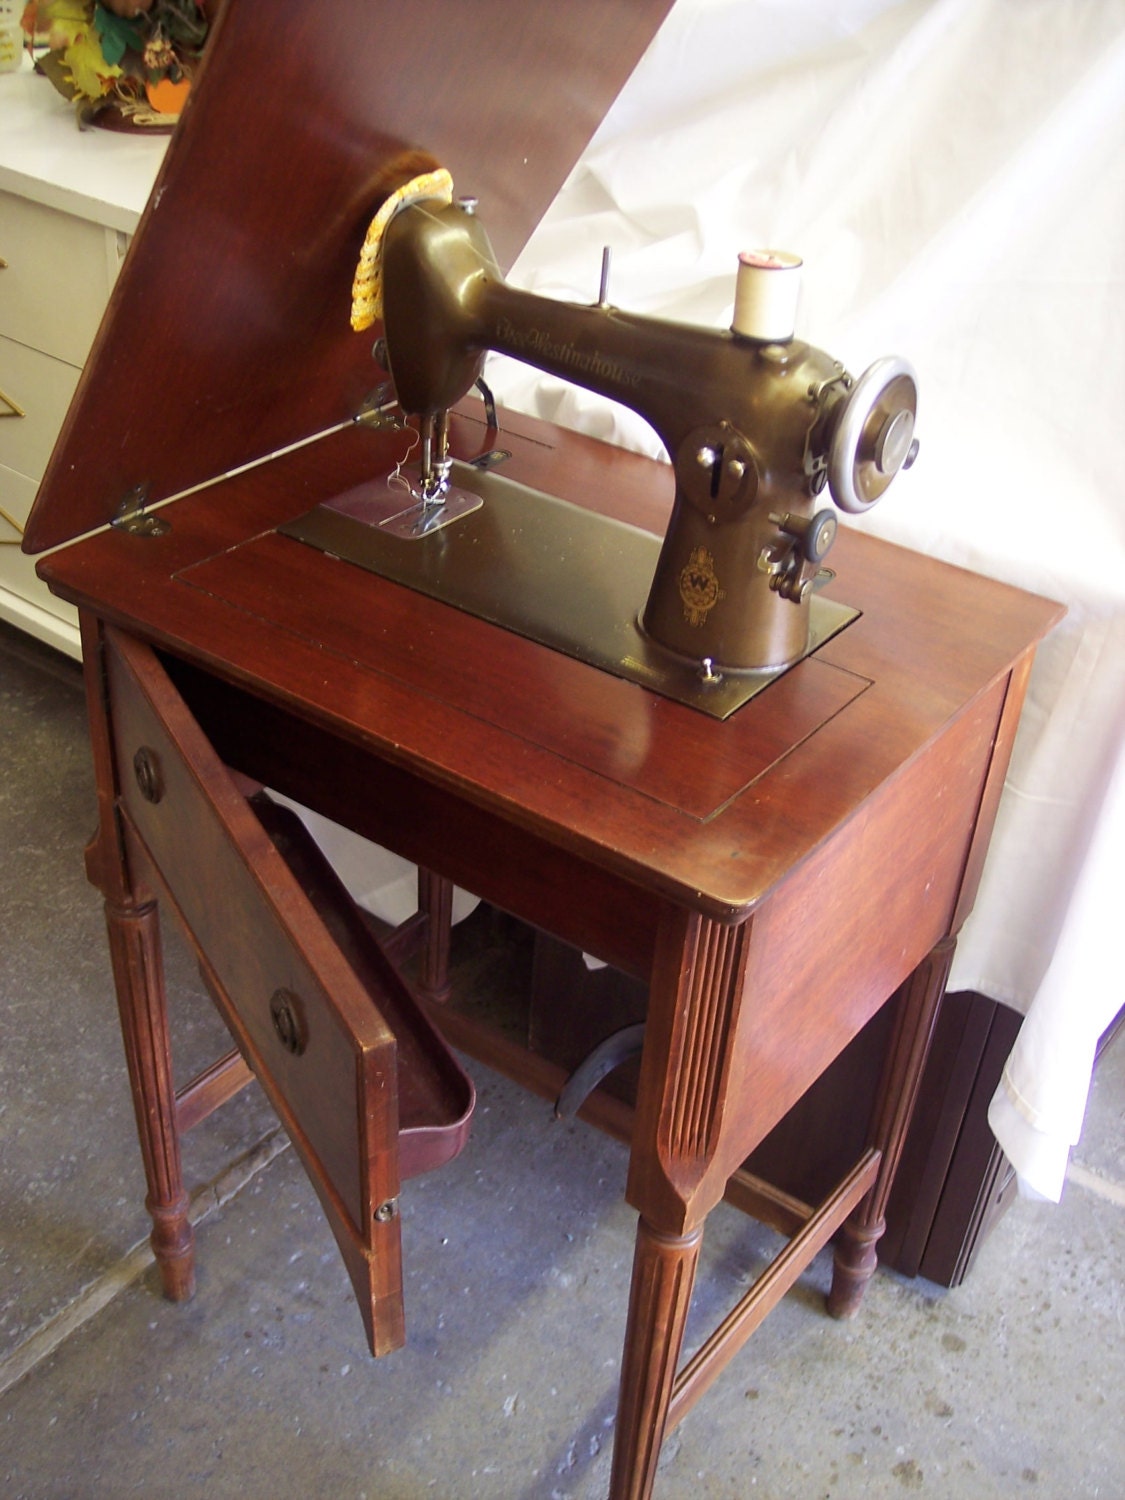 free westinghouse sewing machine number 1 serial ce12105